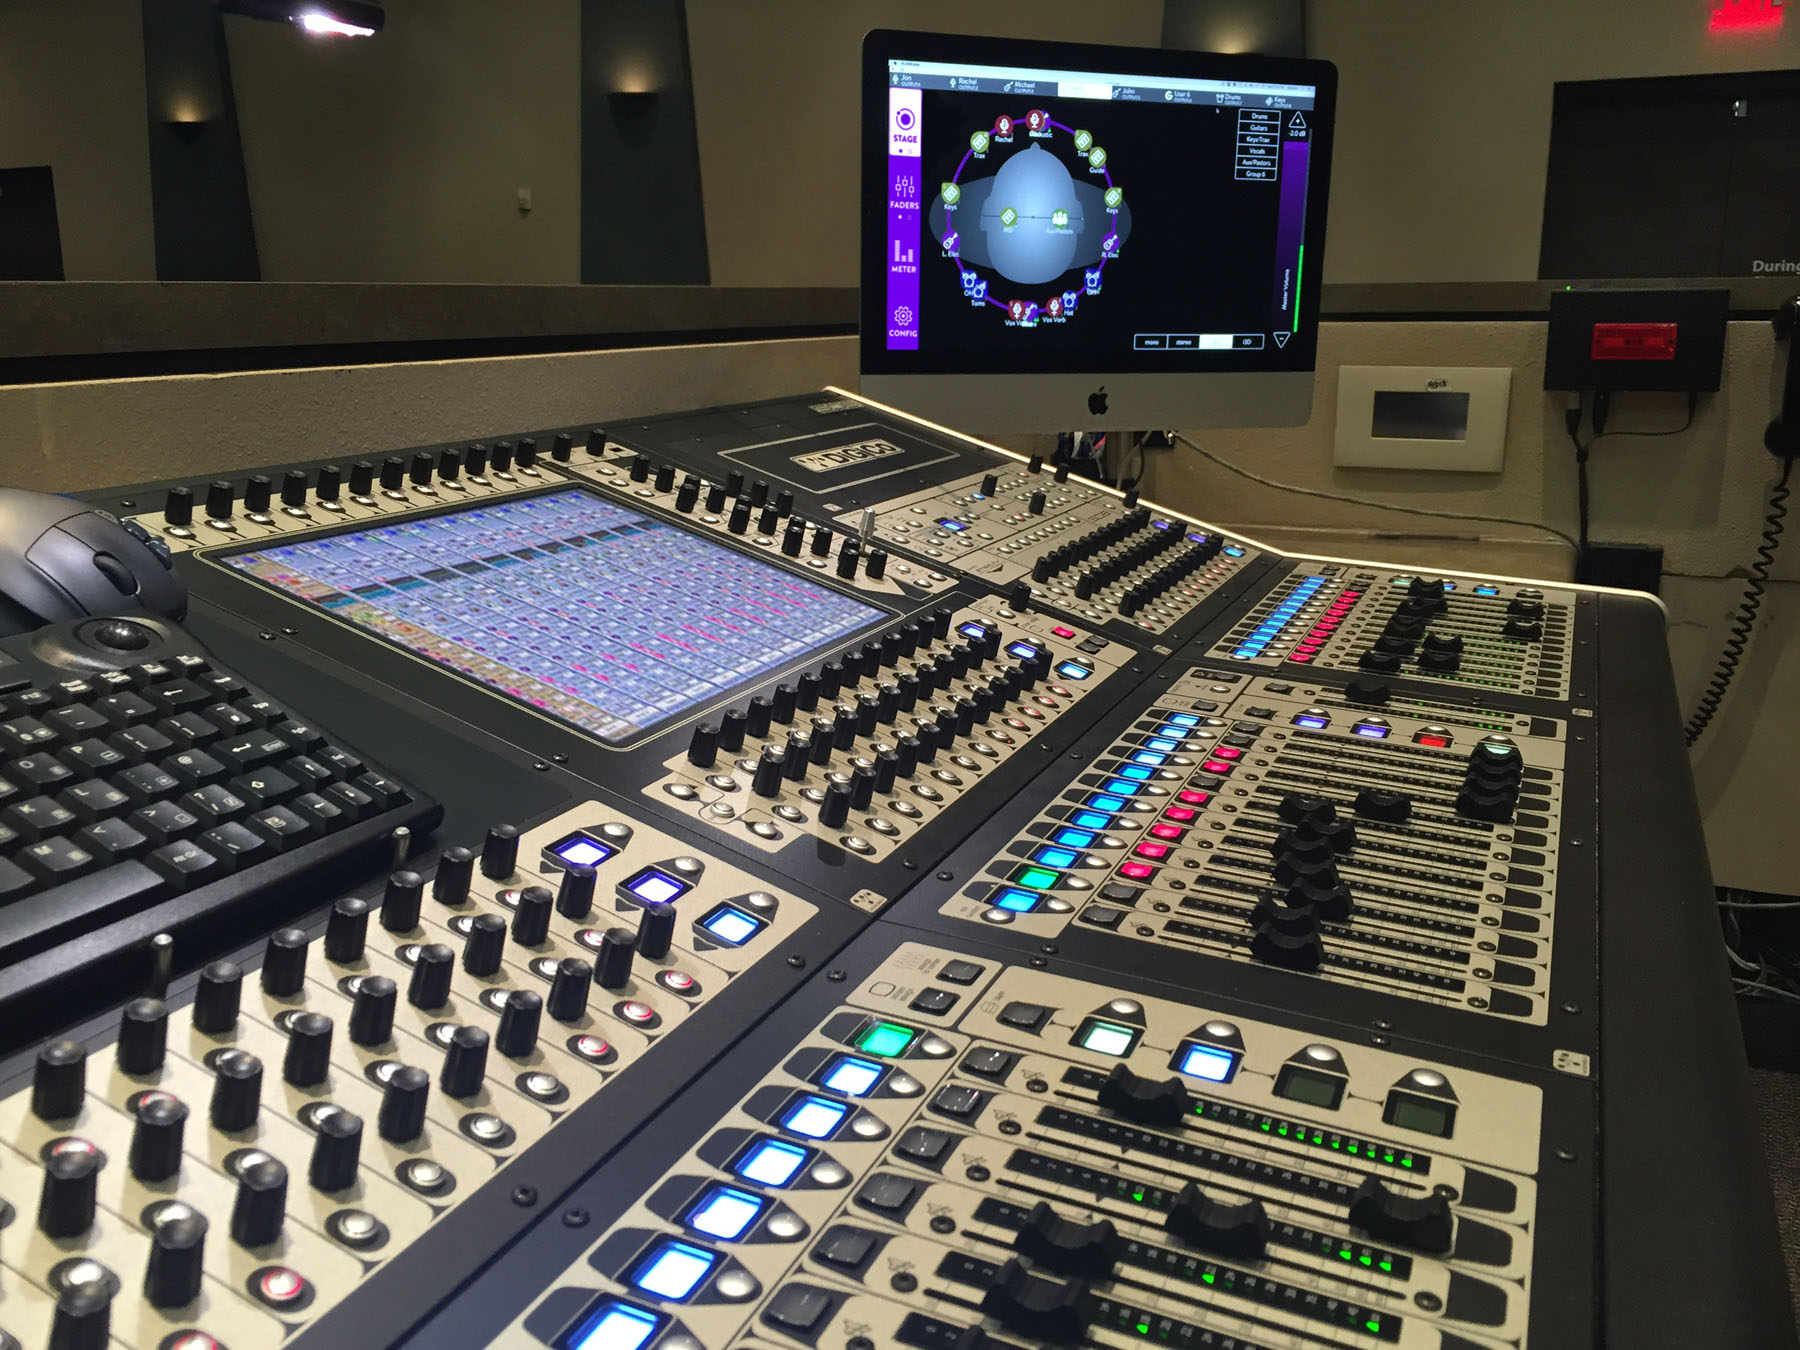 A view of the FOH mix position at SVCC’s Gilbert campus showing the DiGiCo SD8 console and Mac displaying KLANG:app’s 